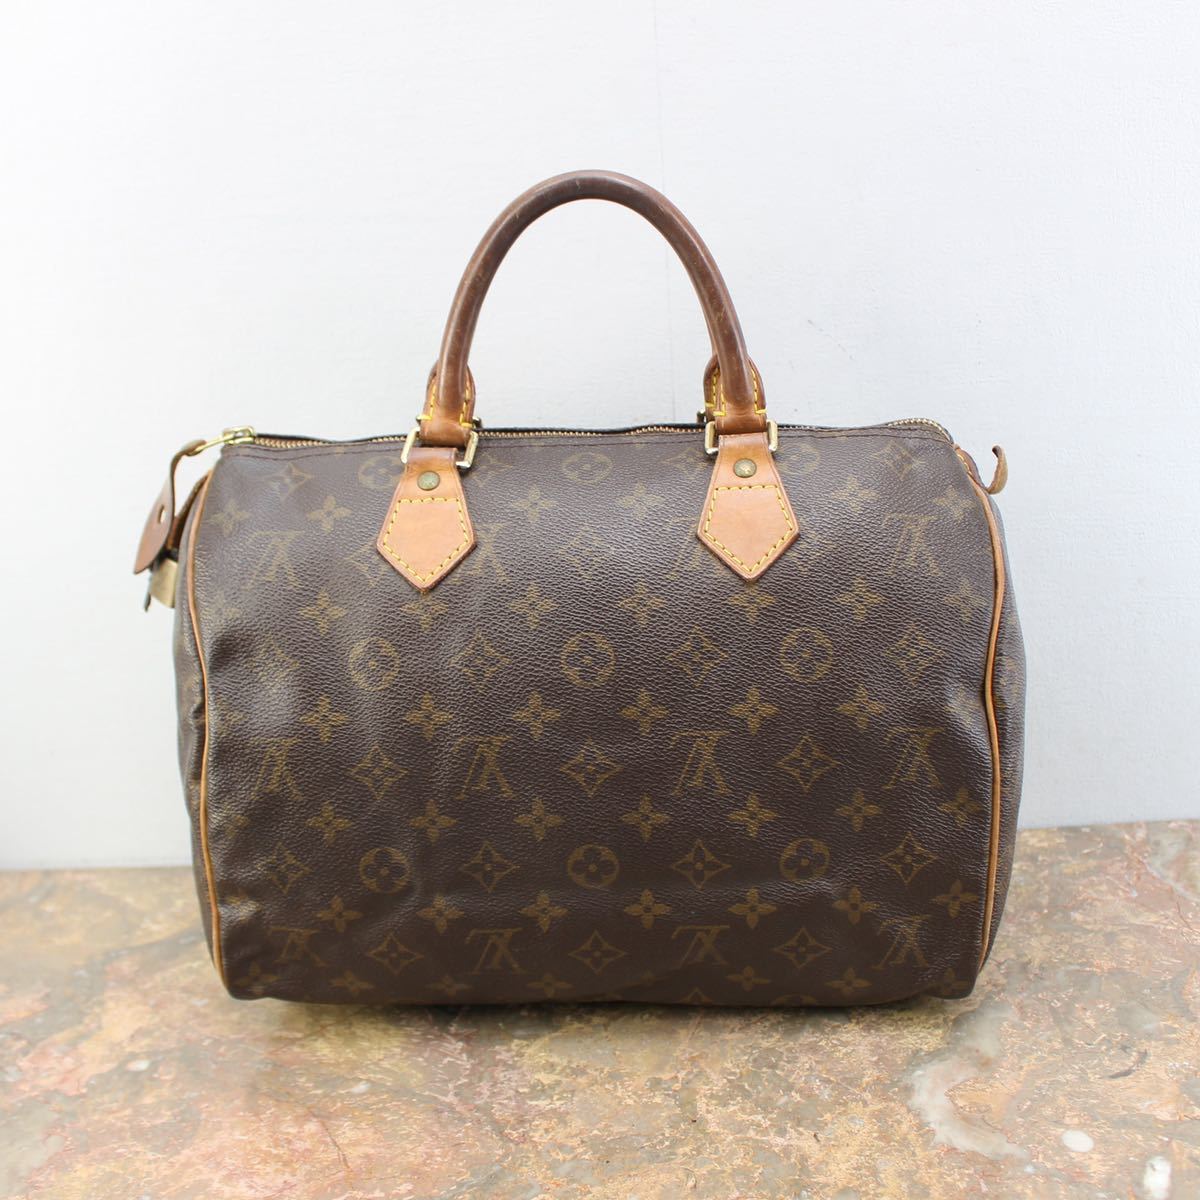 LOUIS VUITTON M41526 TH0040 SPEEDY30 MADE IN FRANCEルイヴィトン